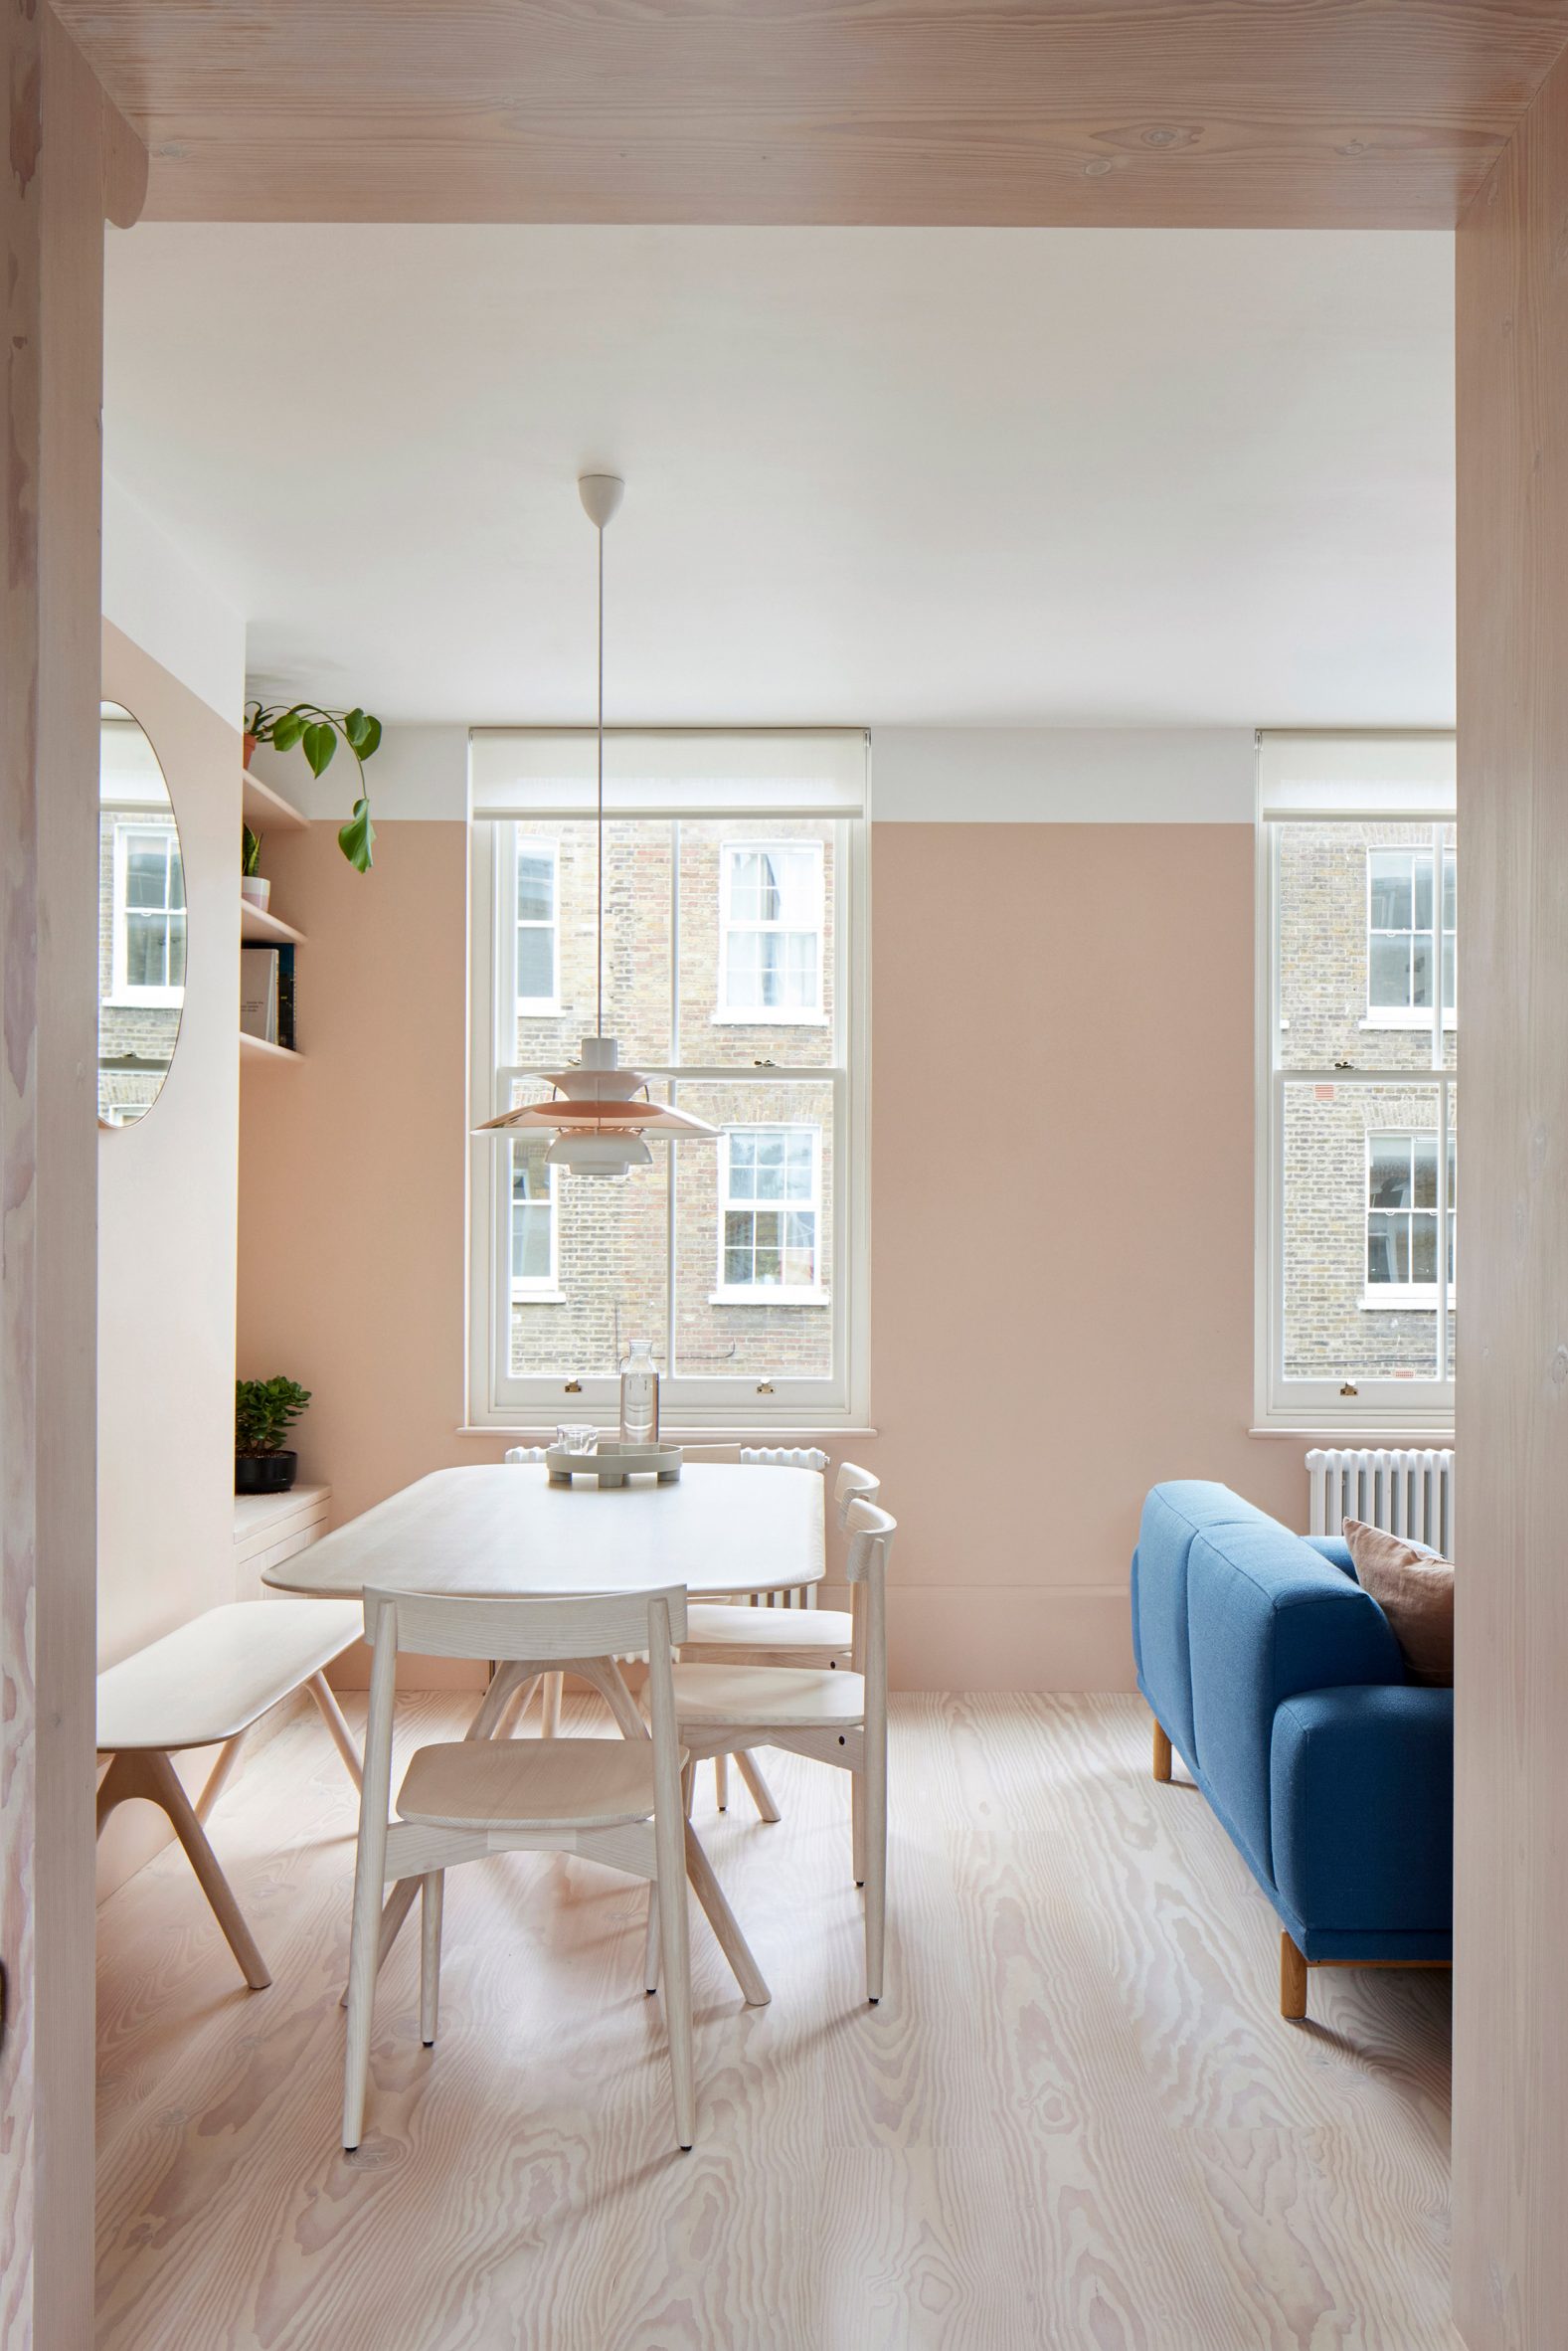 Maison Pour Dodo is a north London flat with a spectrum of storage